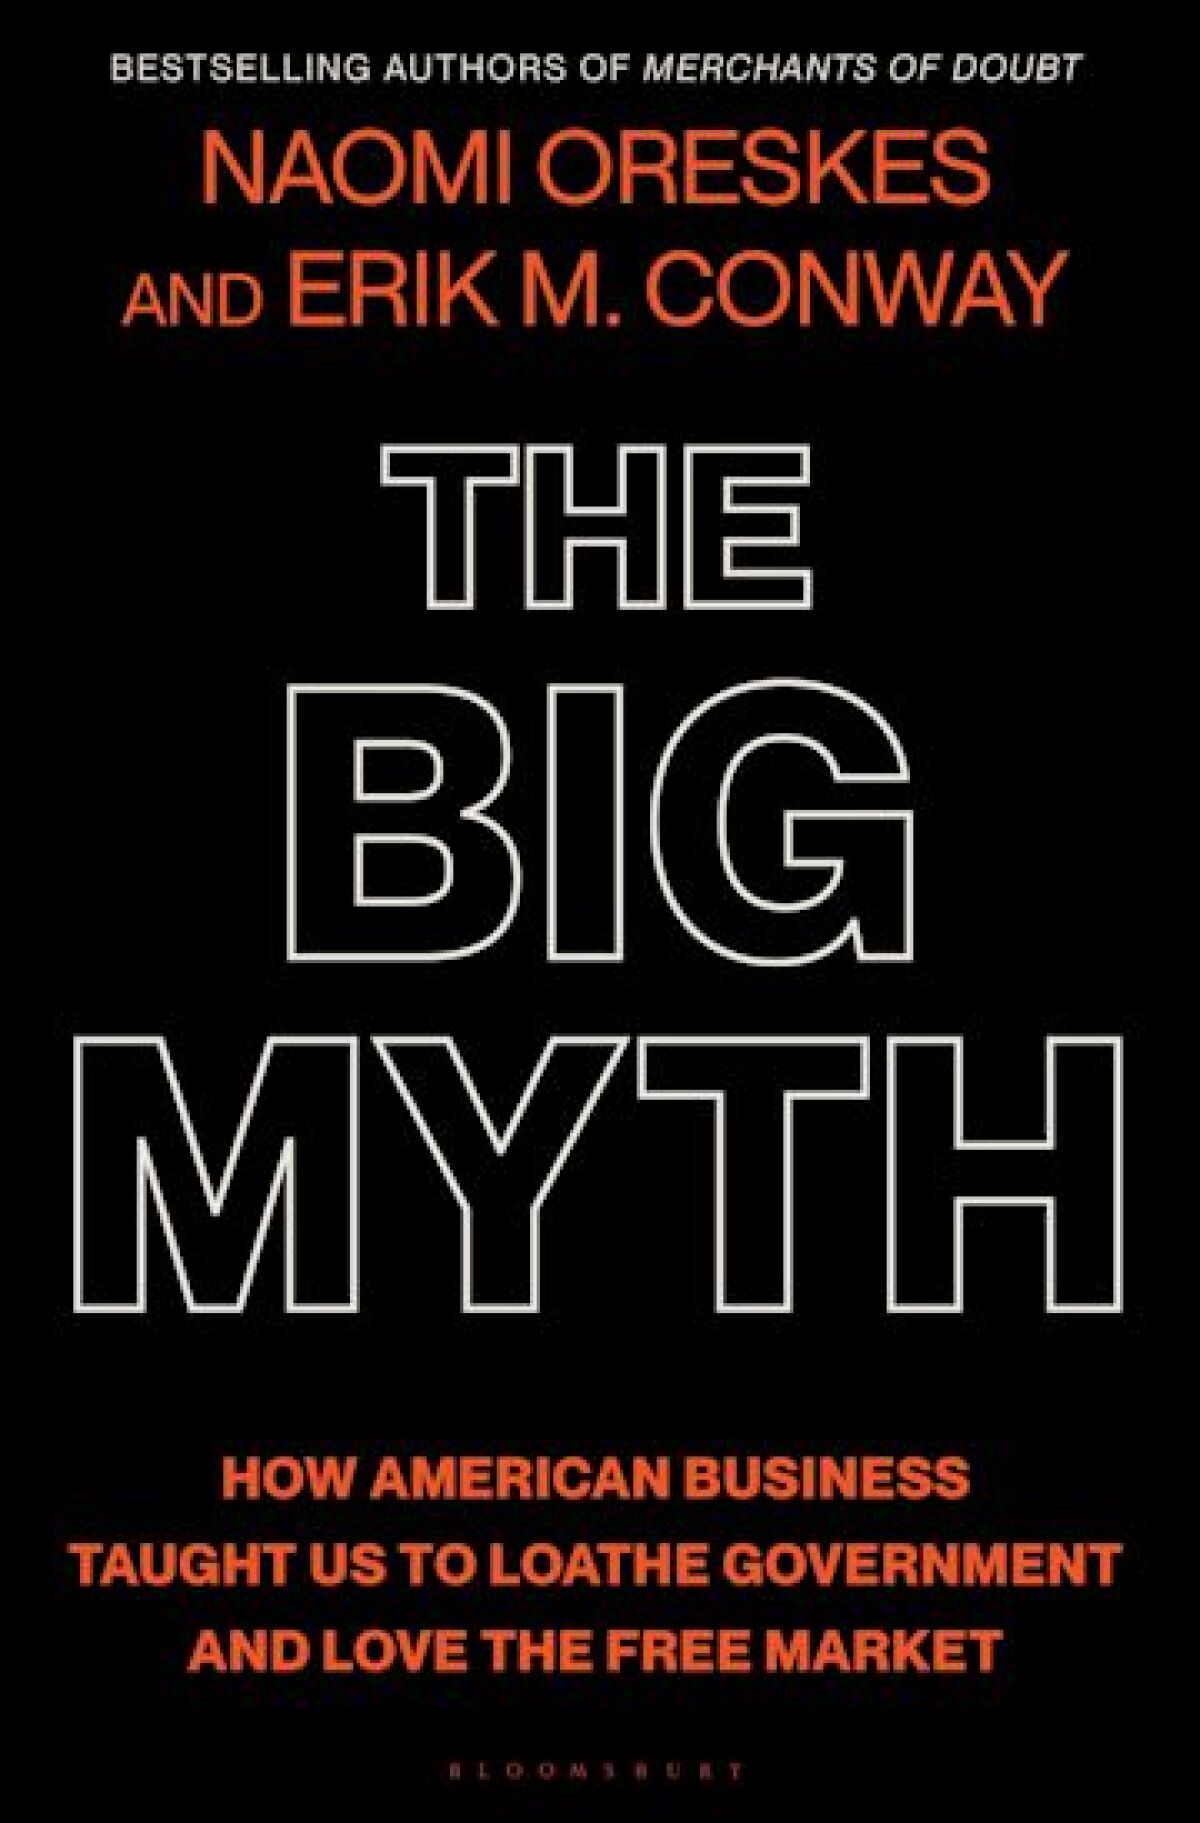 cover of the book 'The Big Myth,' by Naomi Oreskes and Erik M. Conway